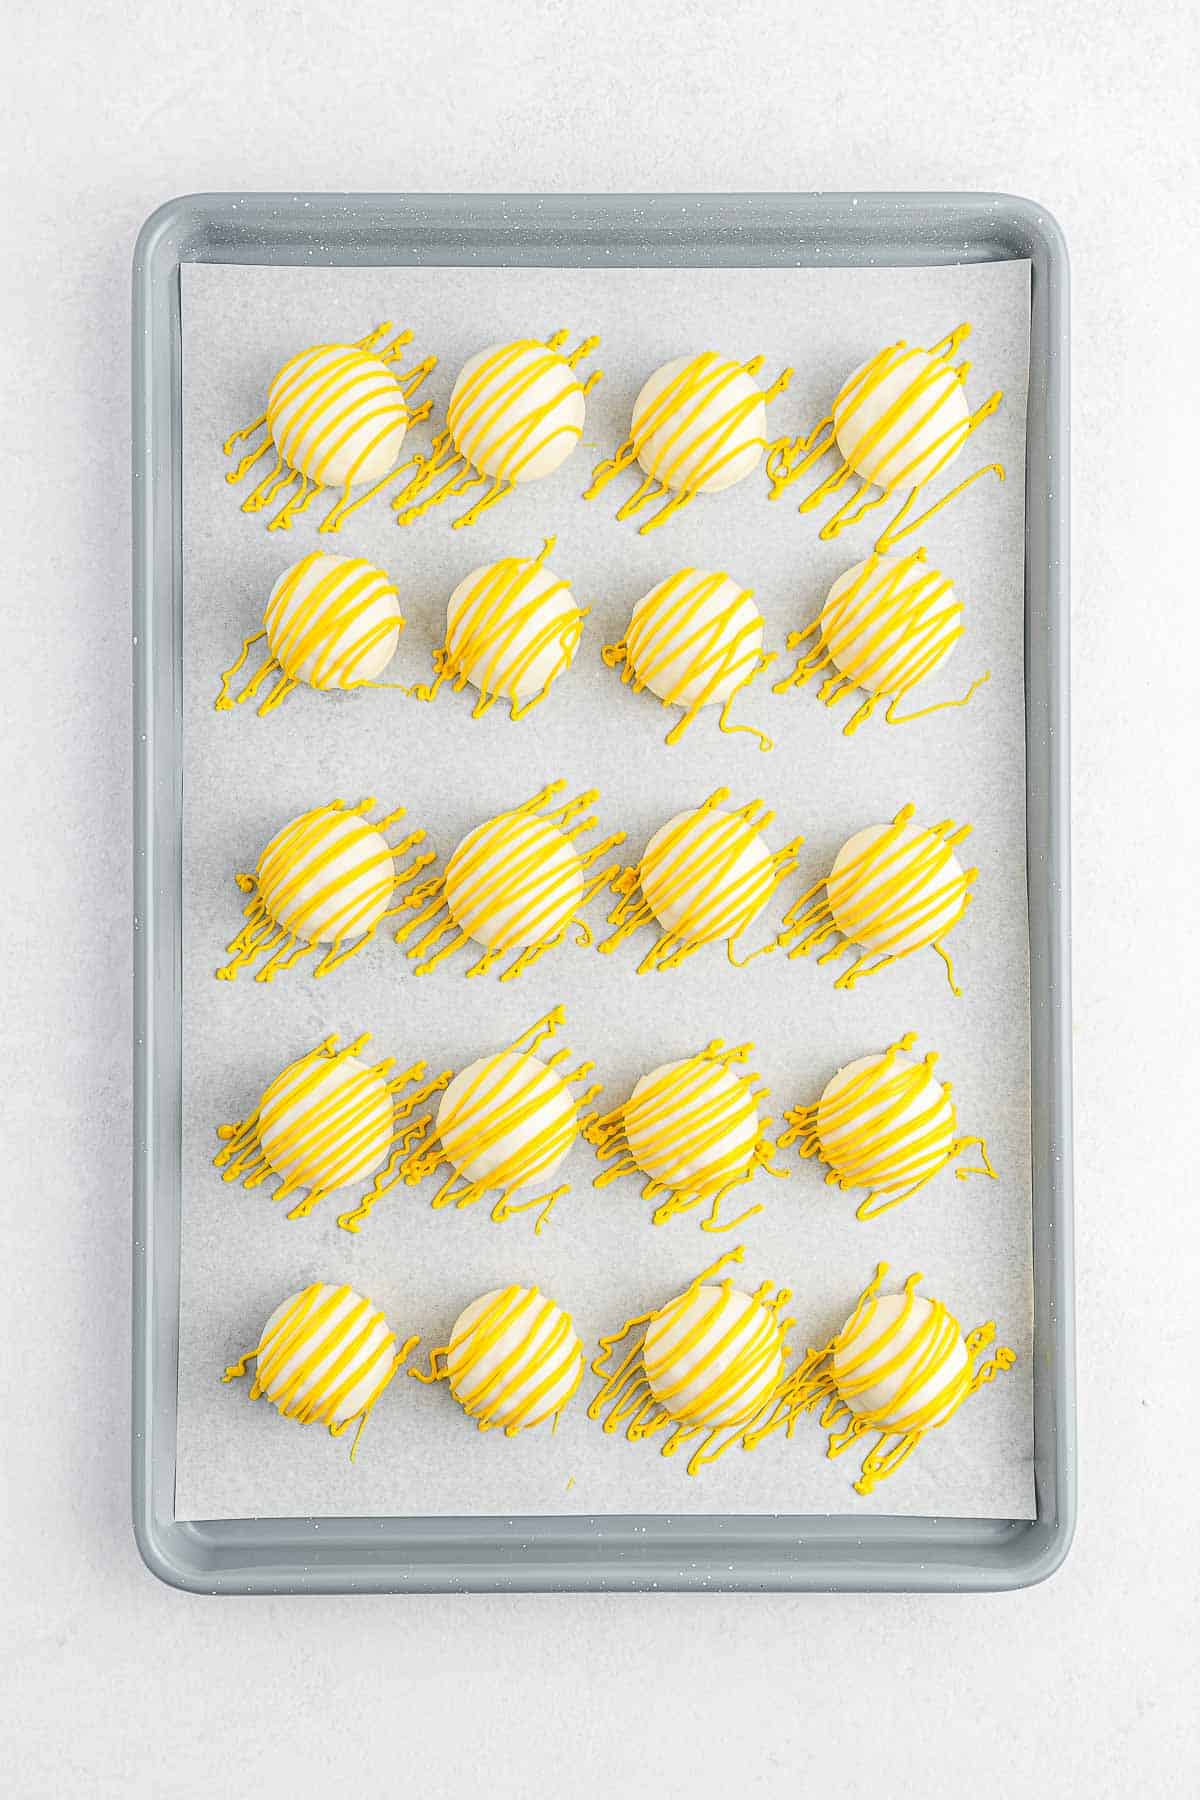 Lemon cake balls with yellow candy drizzle over top on a baking pan.